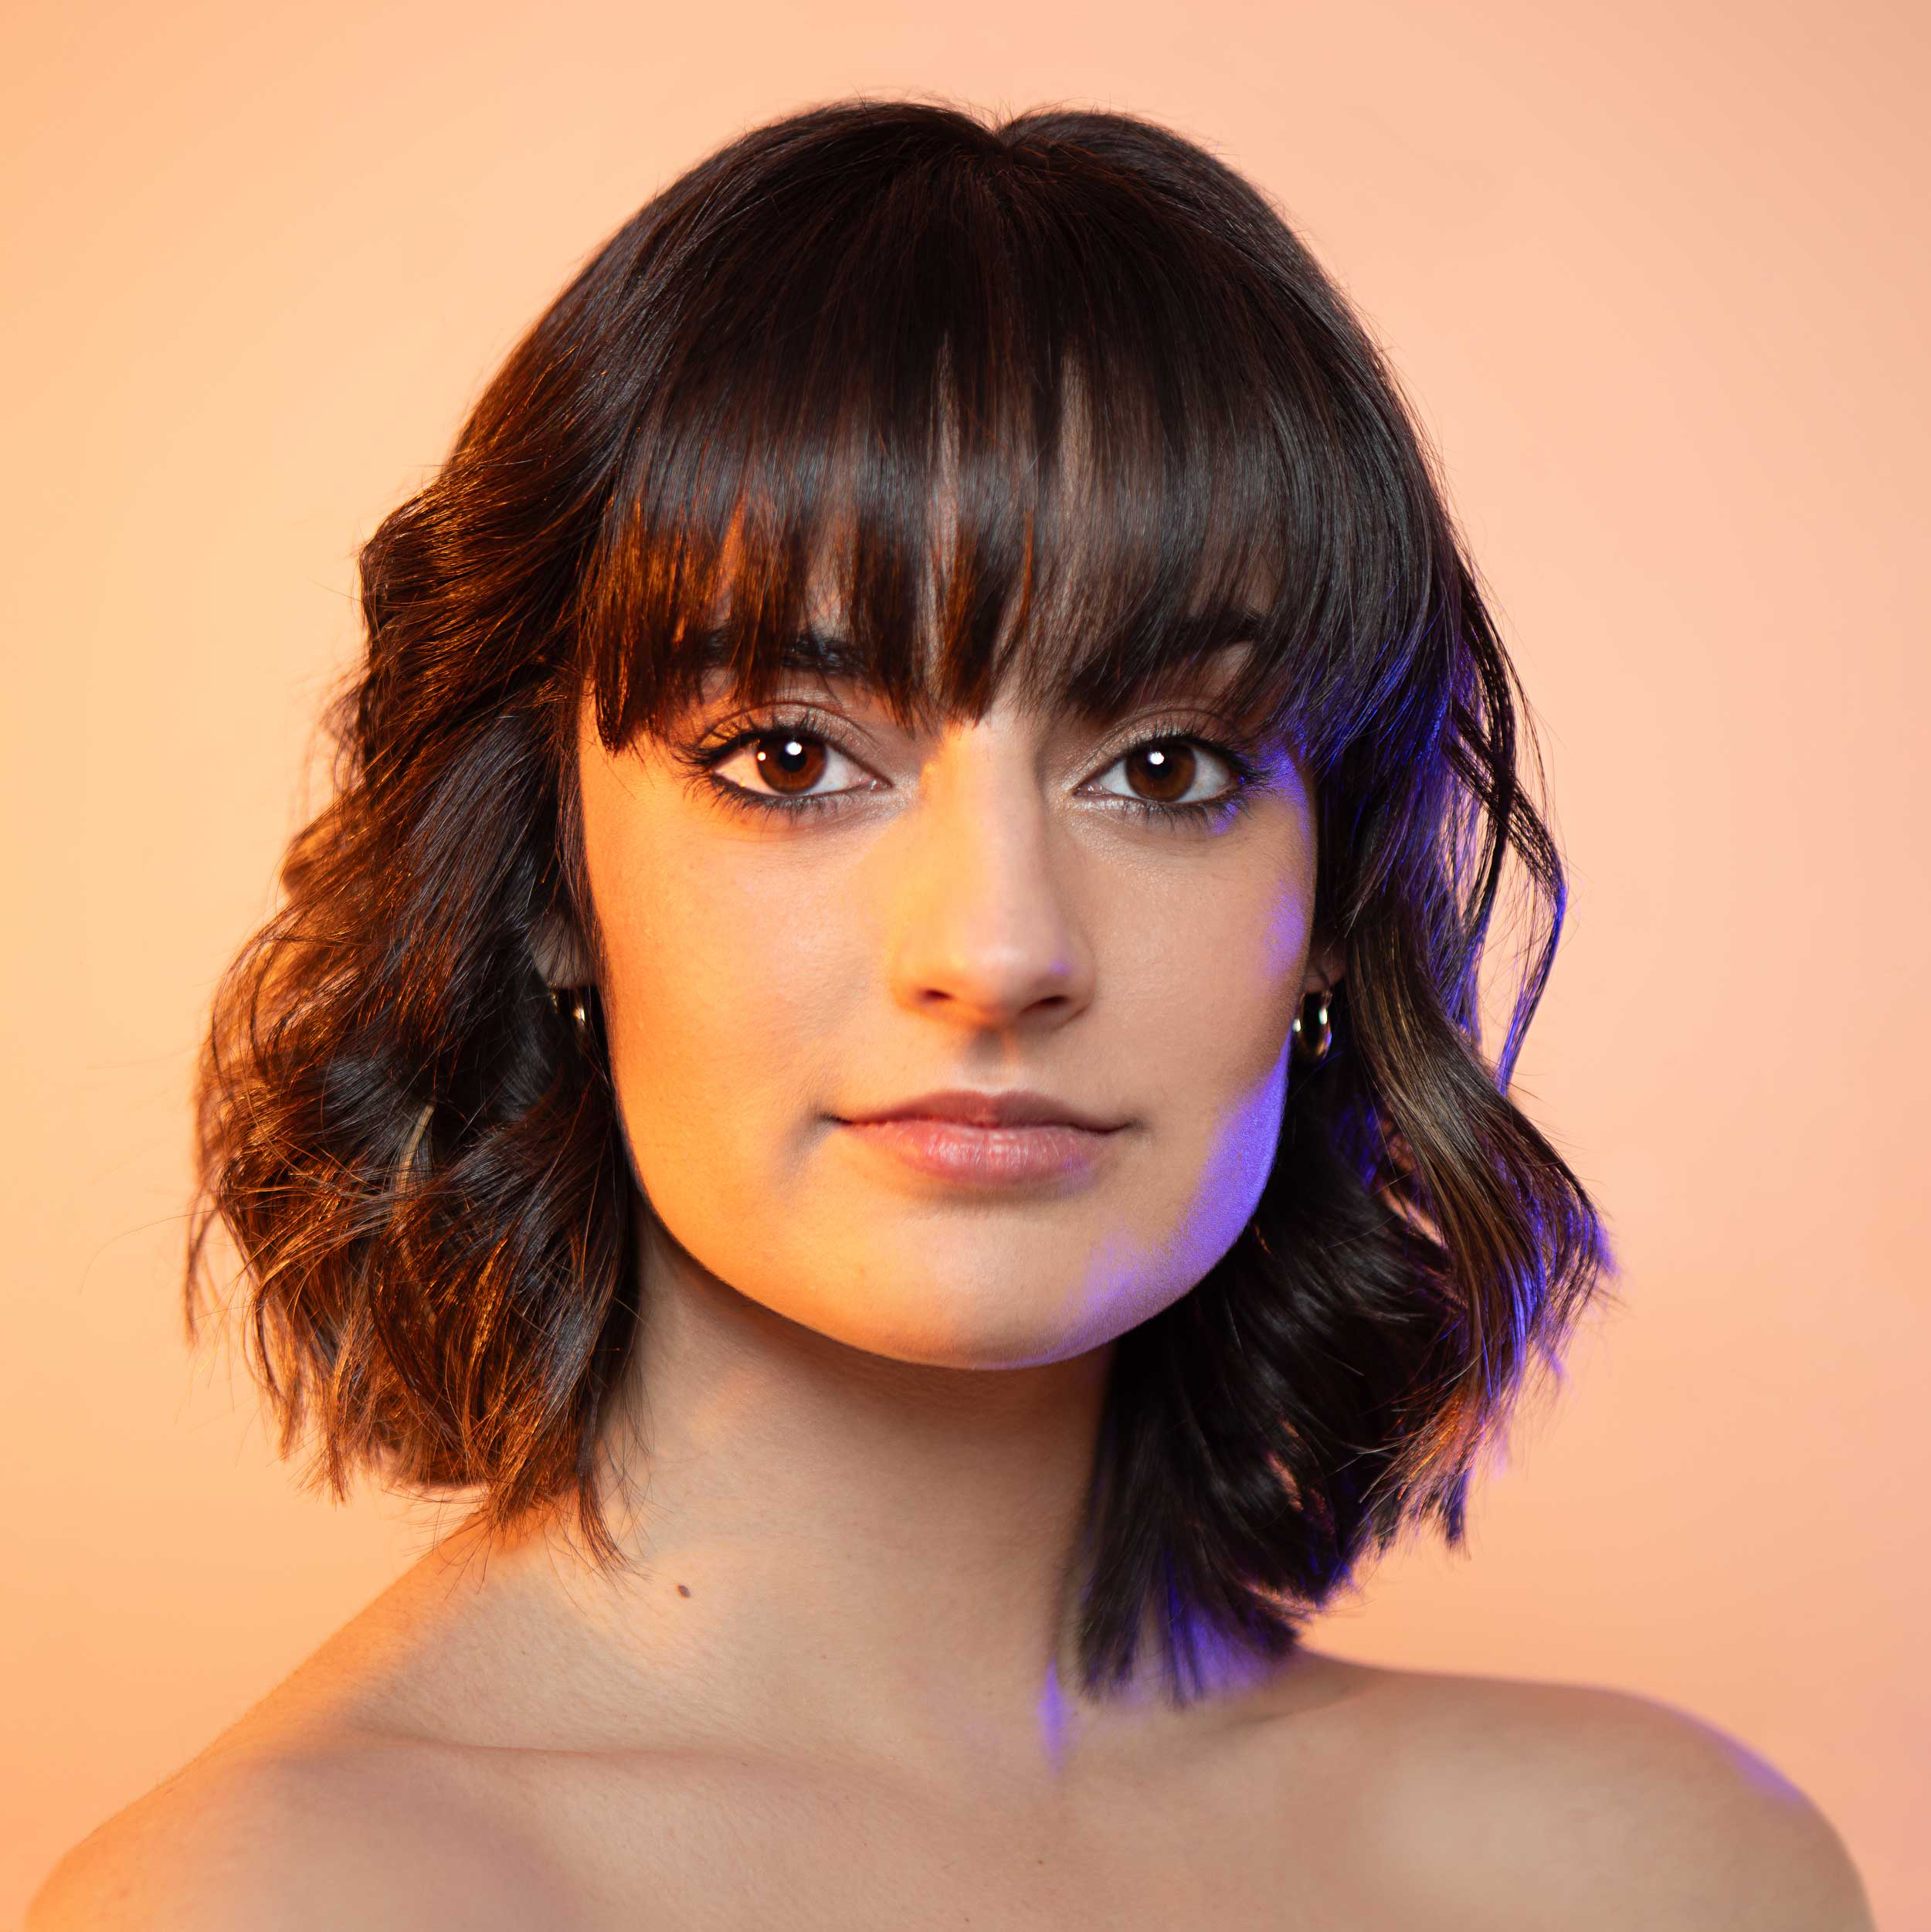 Headshot of an artist with colorful gel lights illuminating the edge of the face and a brightly colored orange background.